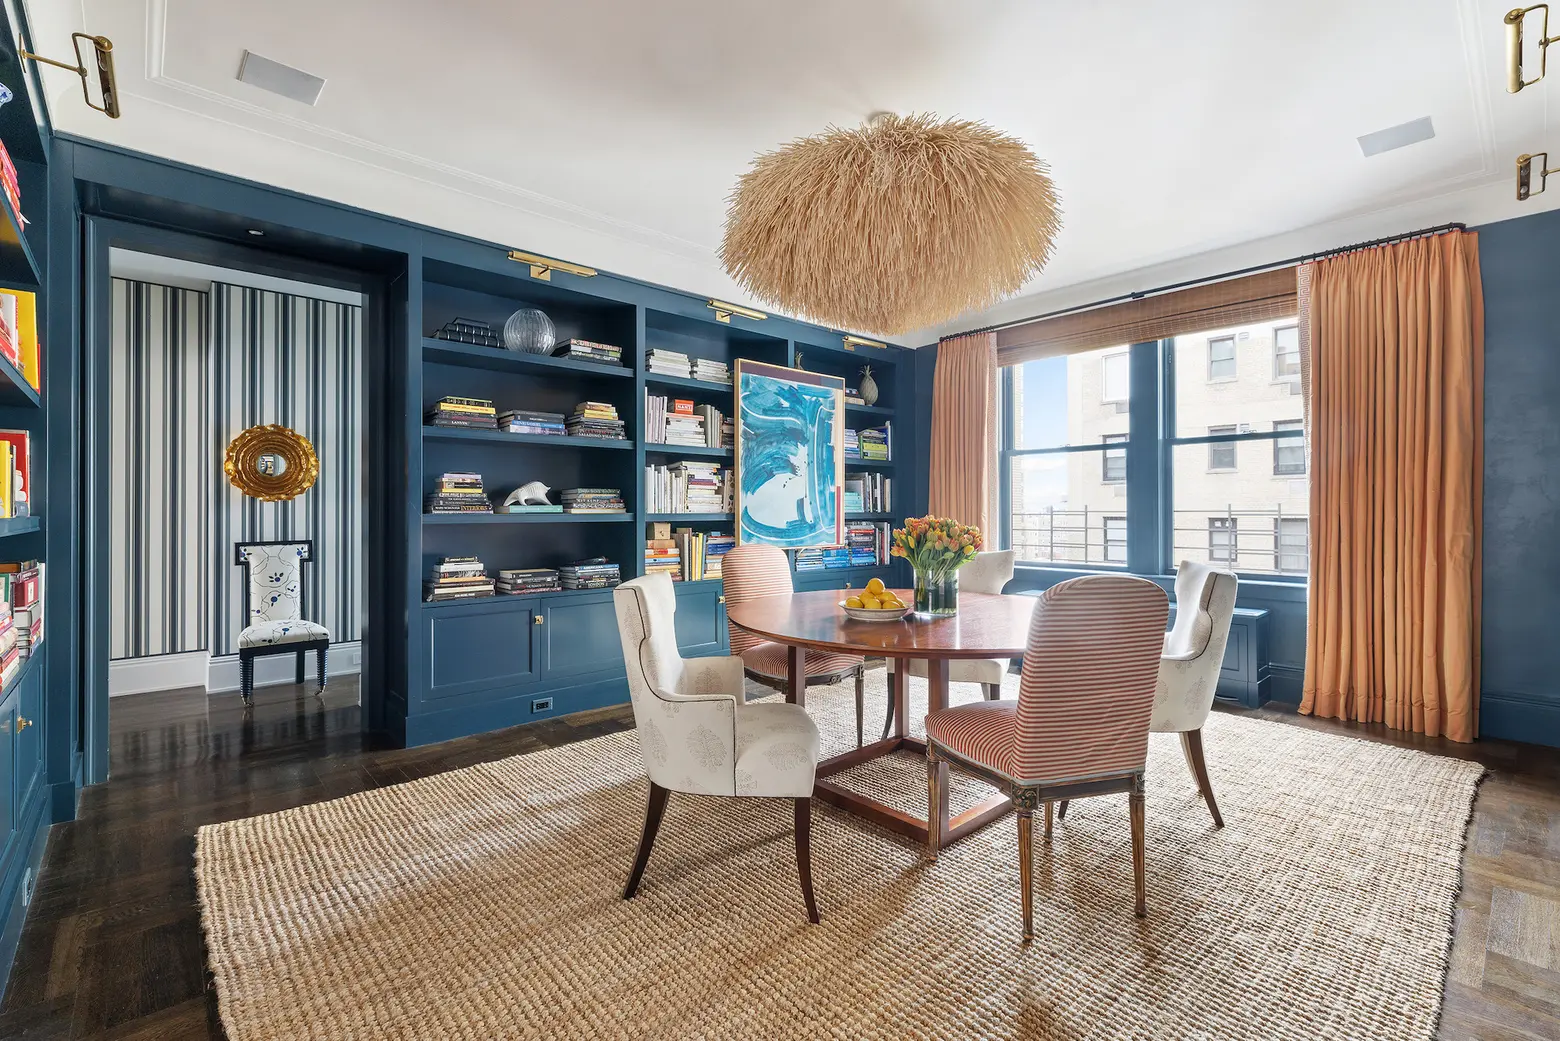 11 Upper East Side Residences That Are Nothing but Timeless